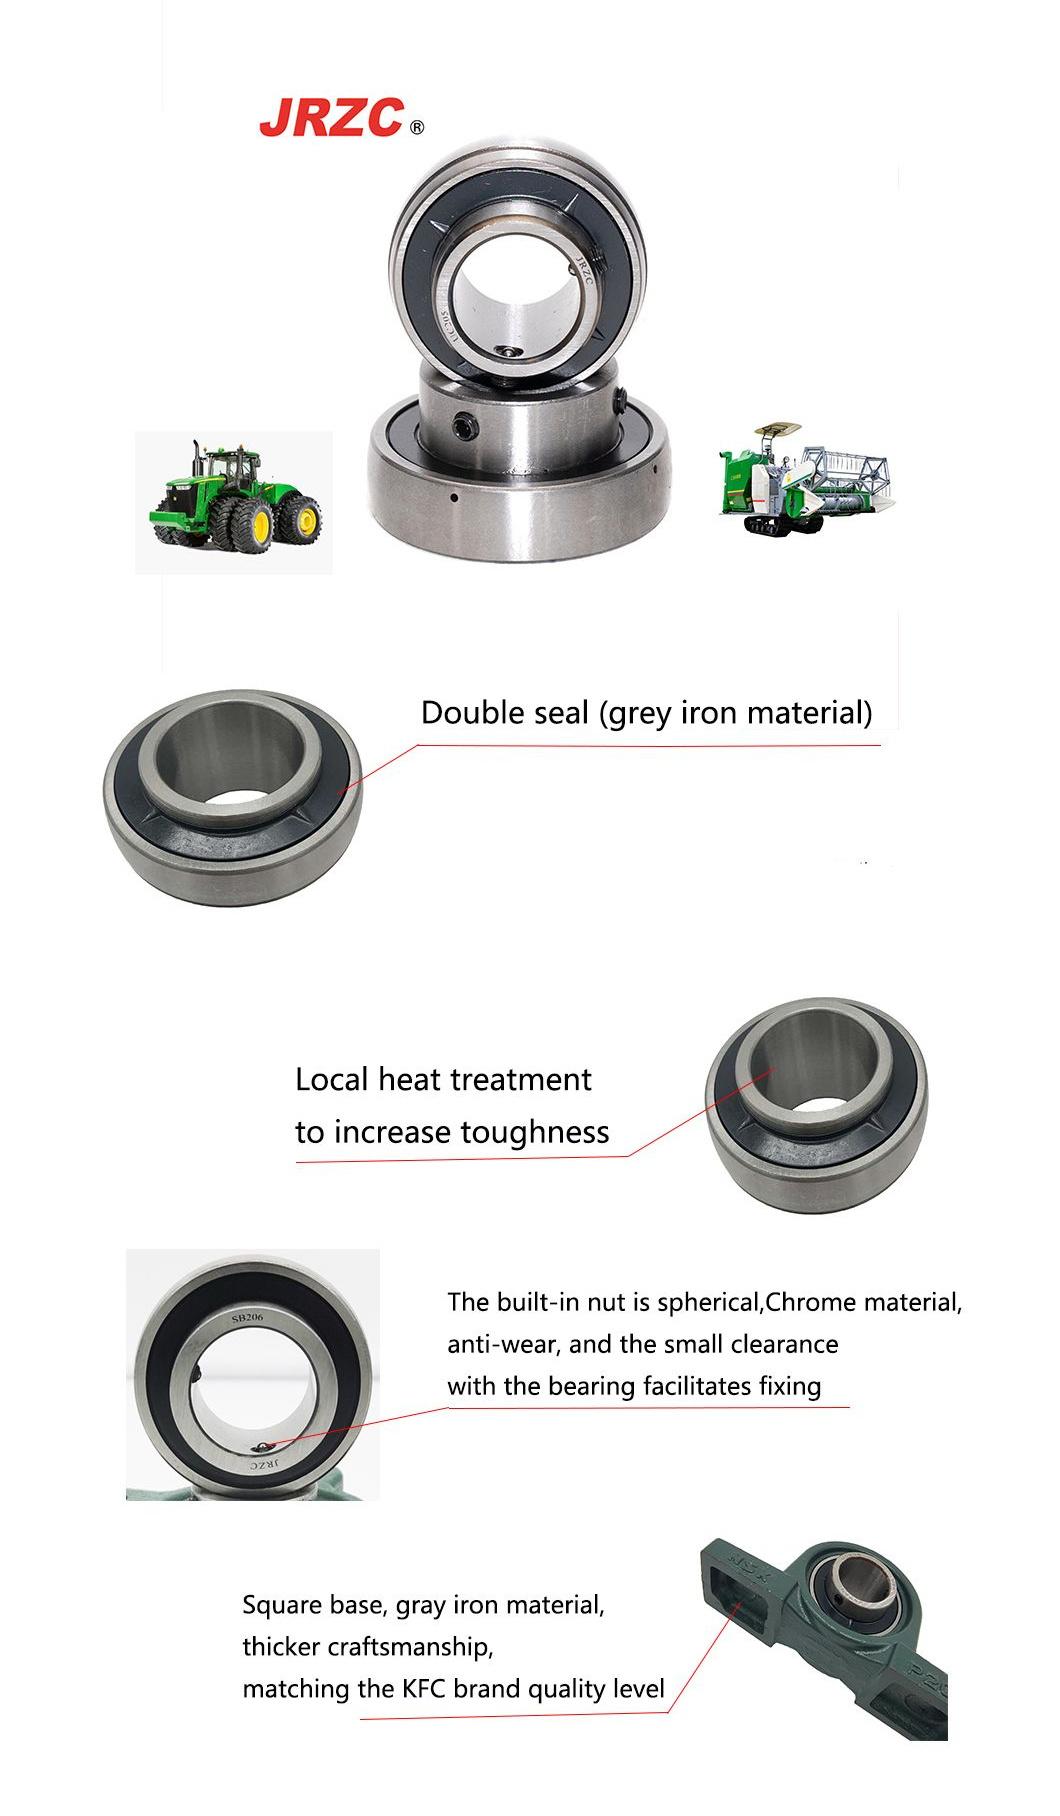 NTN NSK UCP UC Series Housing, Pillow Block Deep Groove Small Size Ball Bearing, Spherical Tapered Thrust Roller Bearing, Insert Auto Bearing for Machine Parts